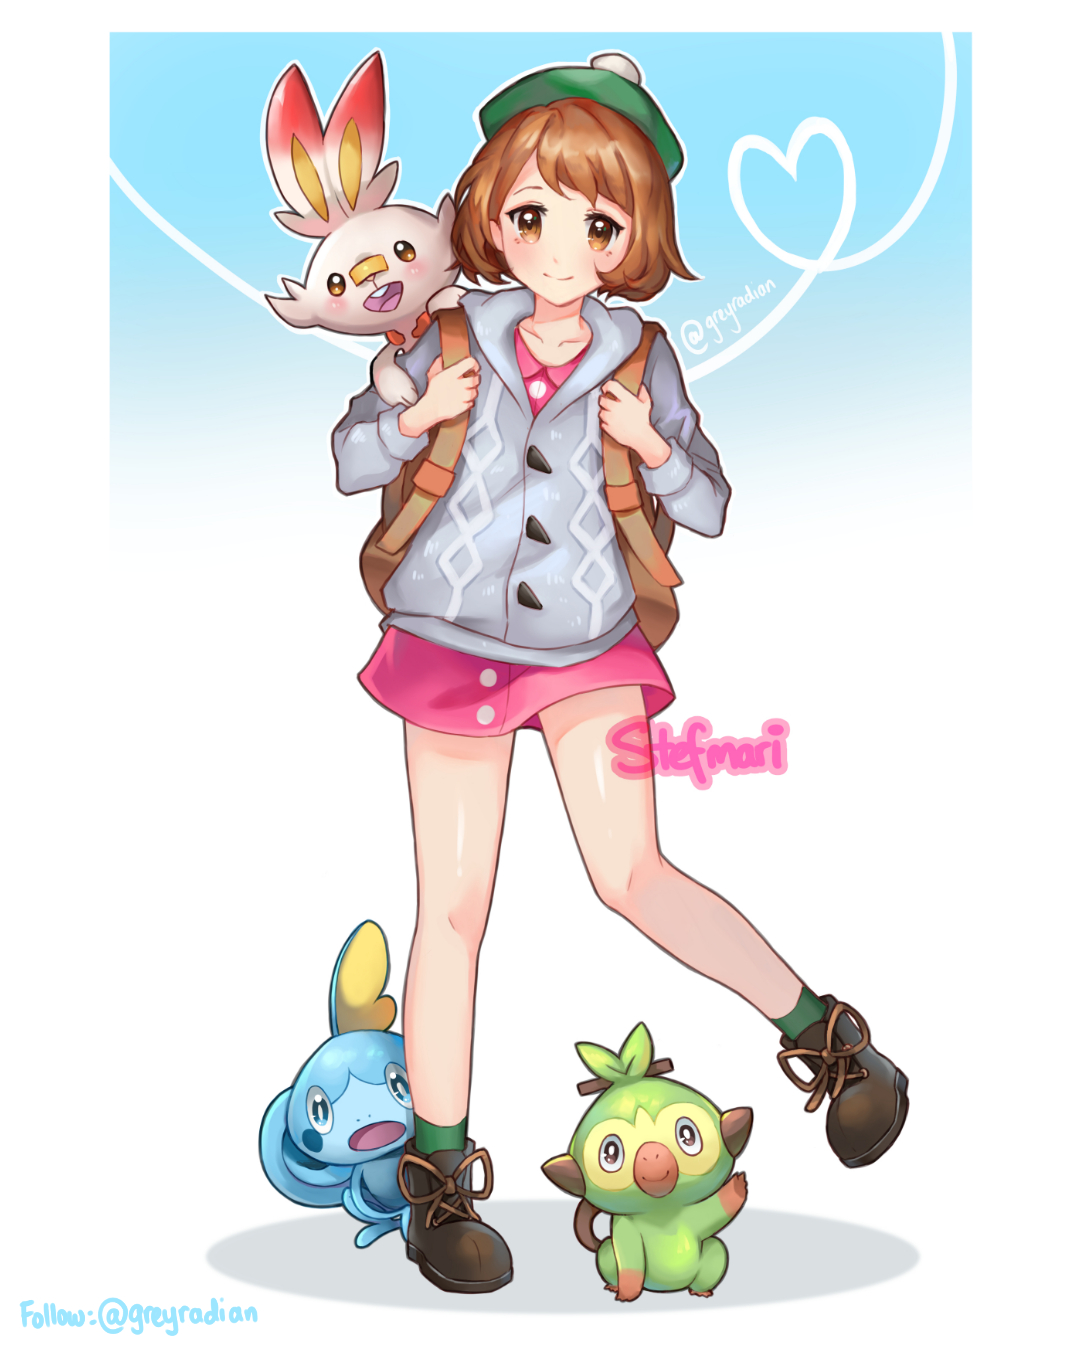 1080x1350 my drawing of the new pokemon trainer - Pokemon Trainer Drawing.